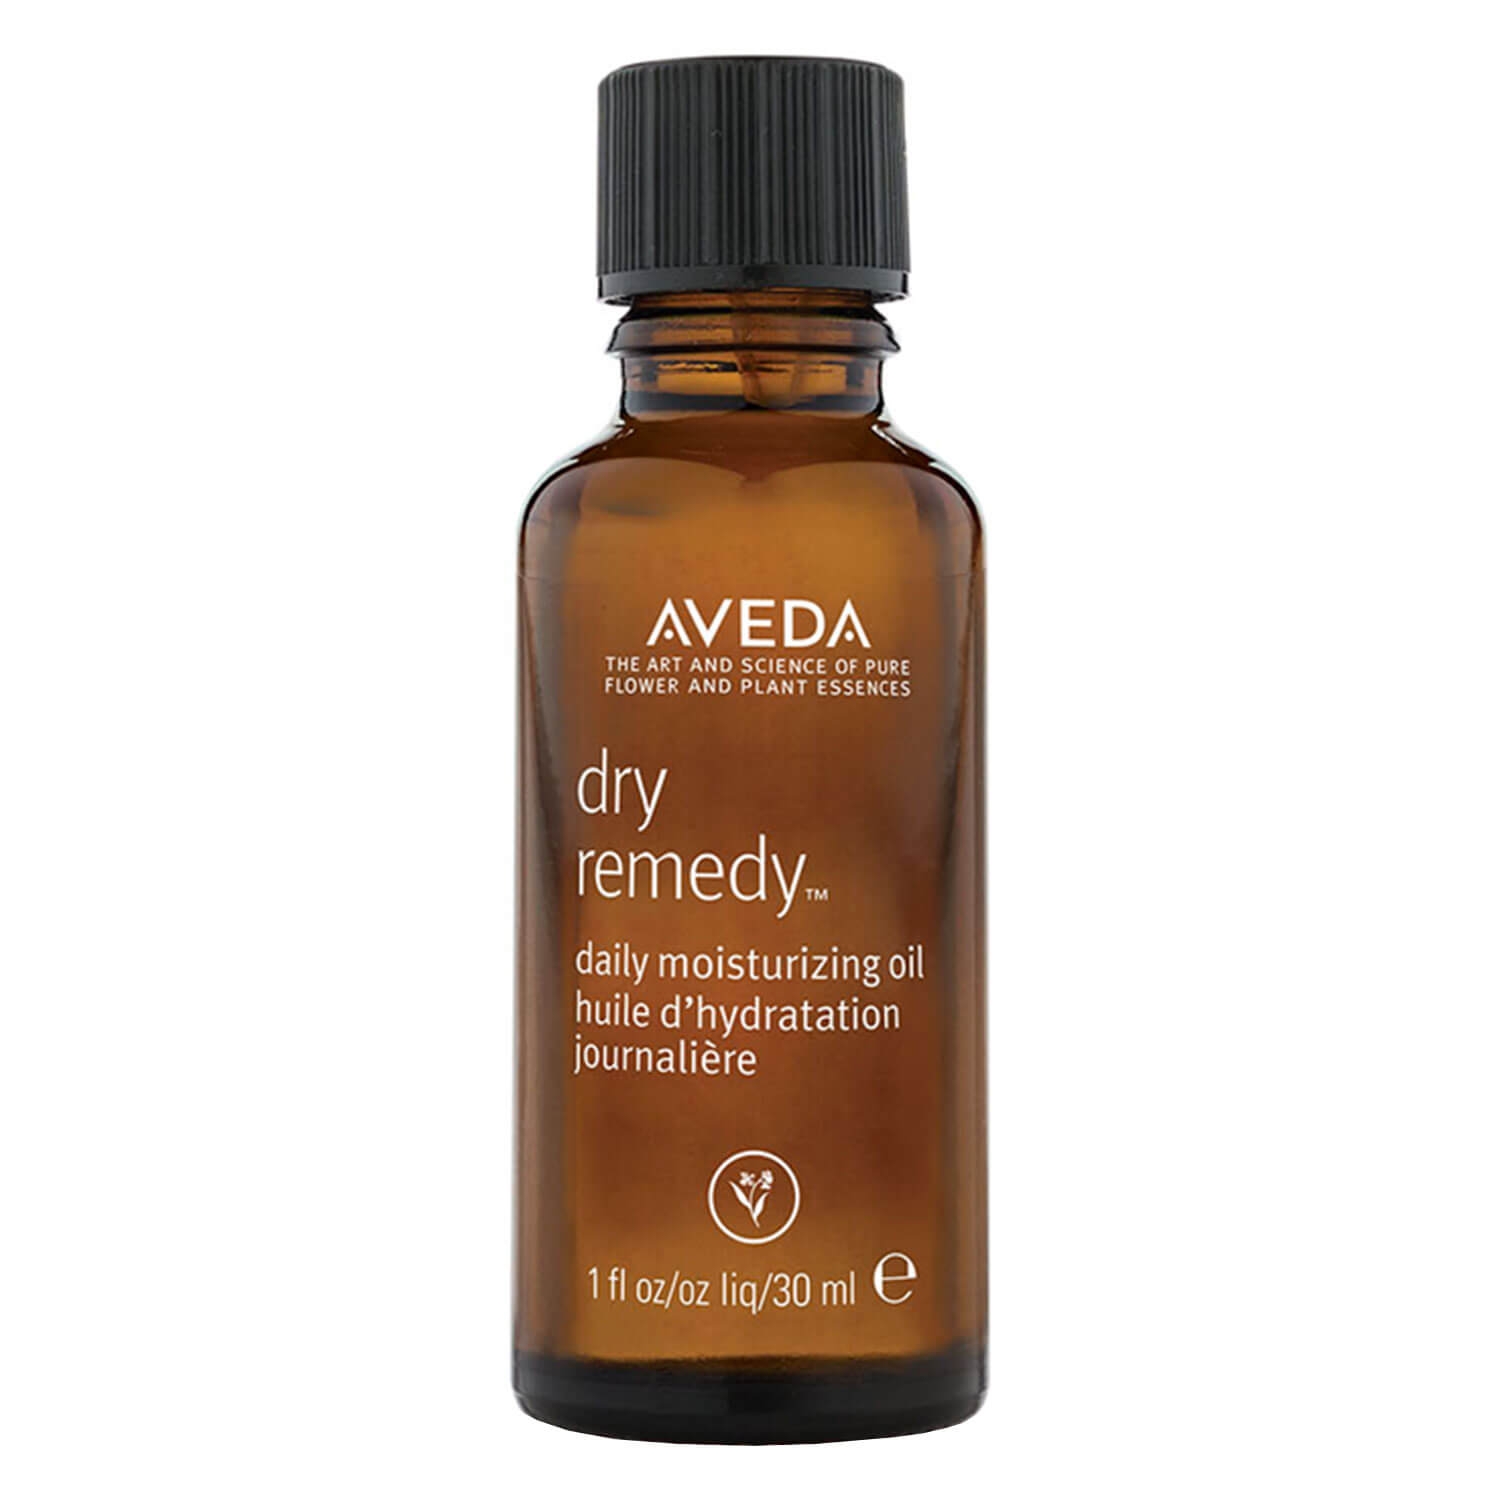 Product image from dry remedy - daily moisturizing oil